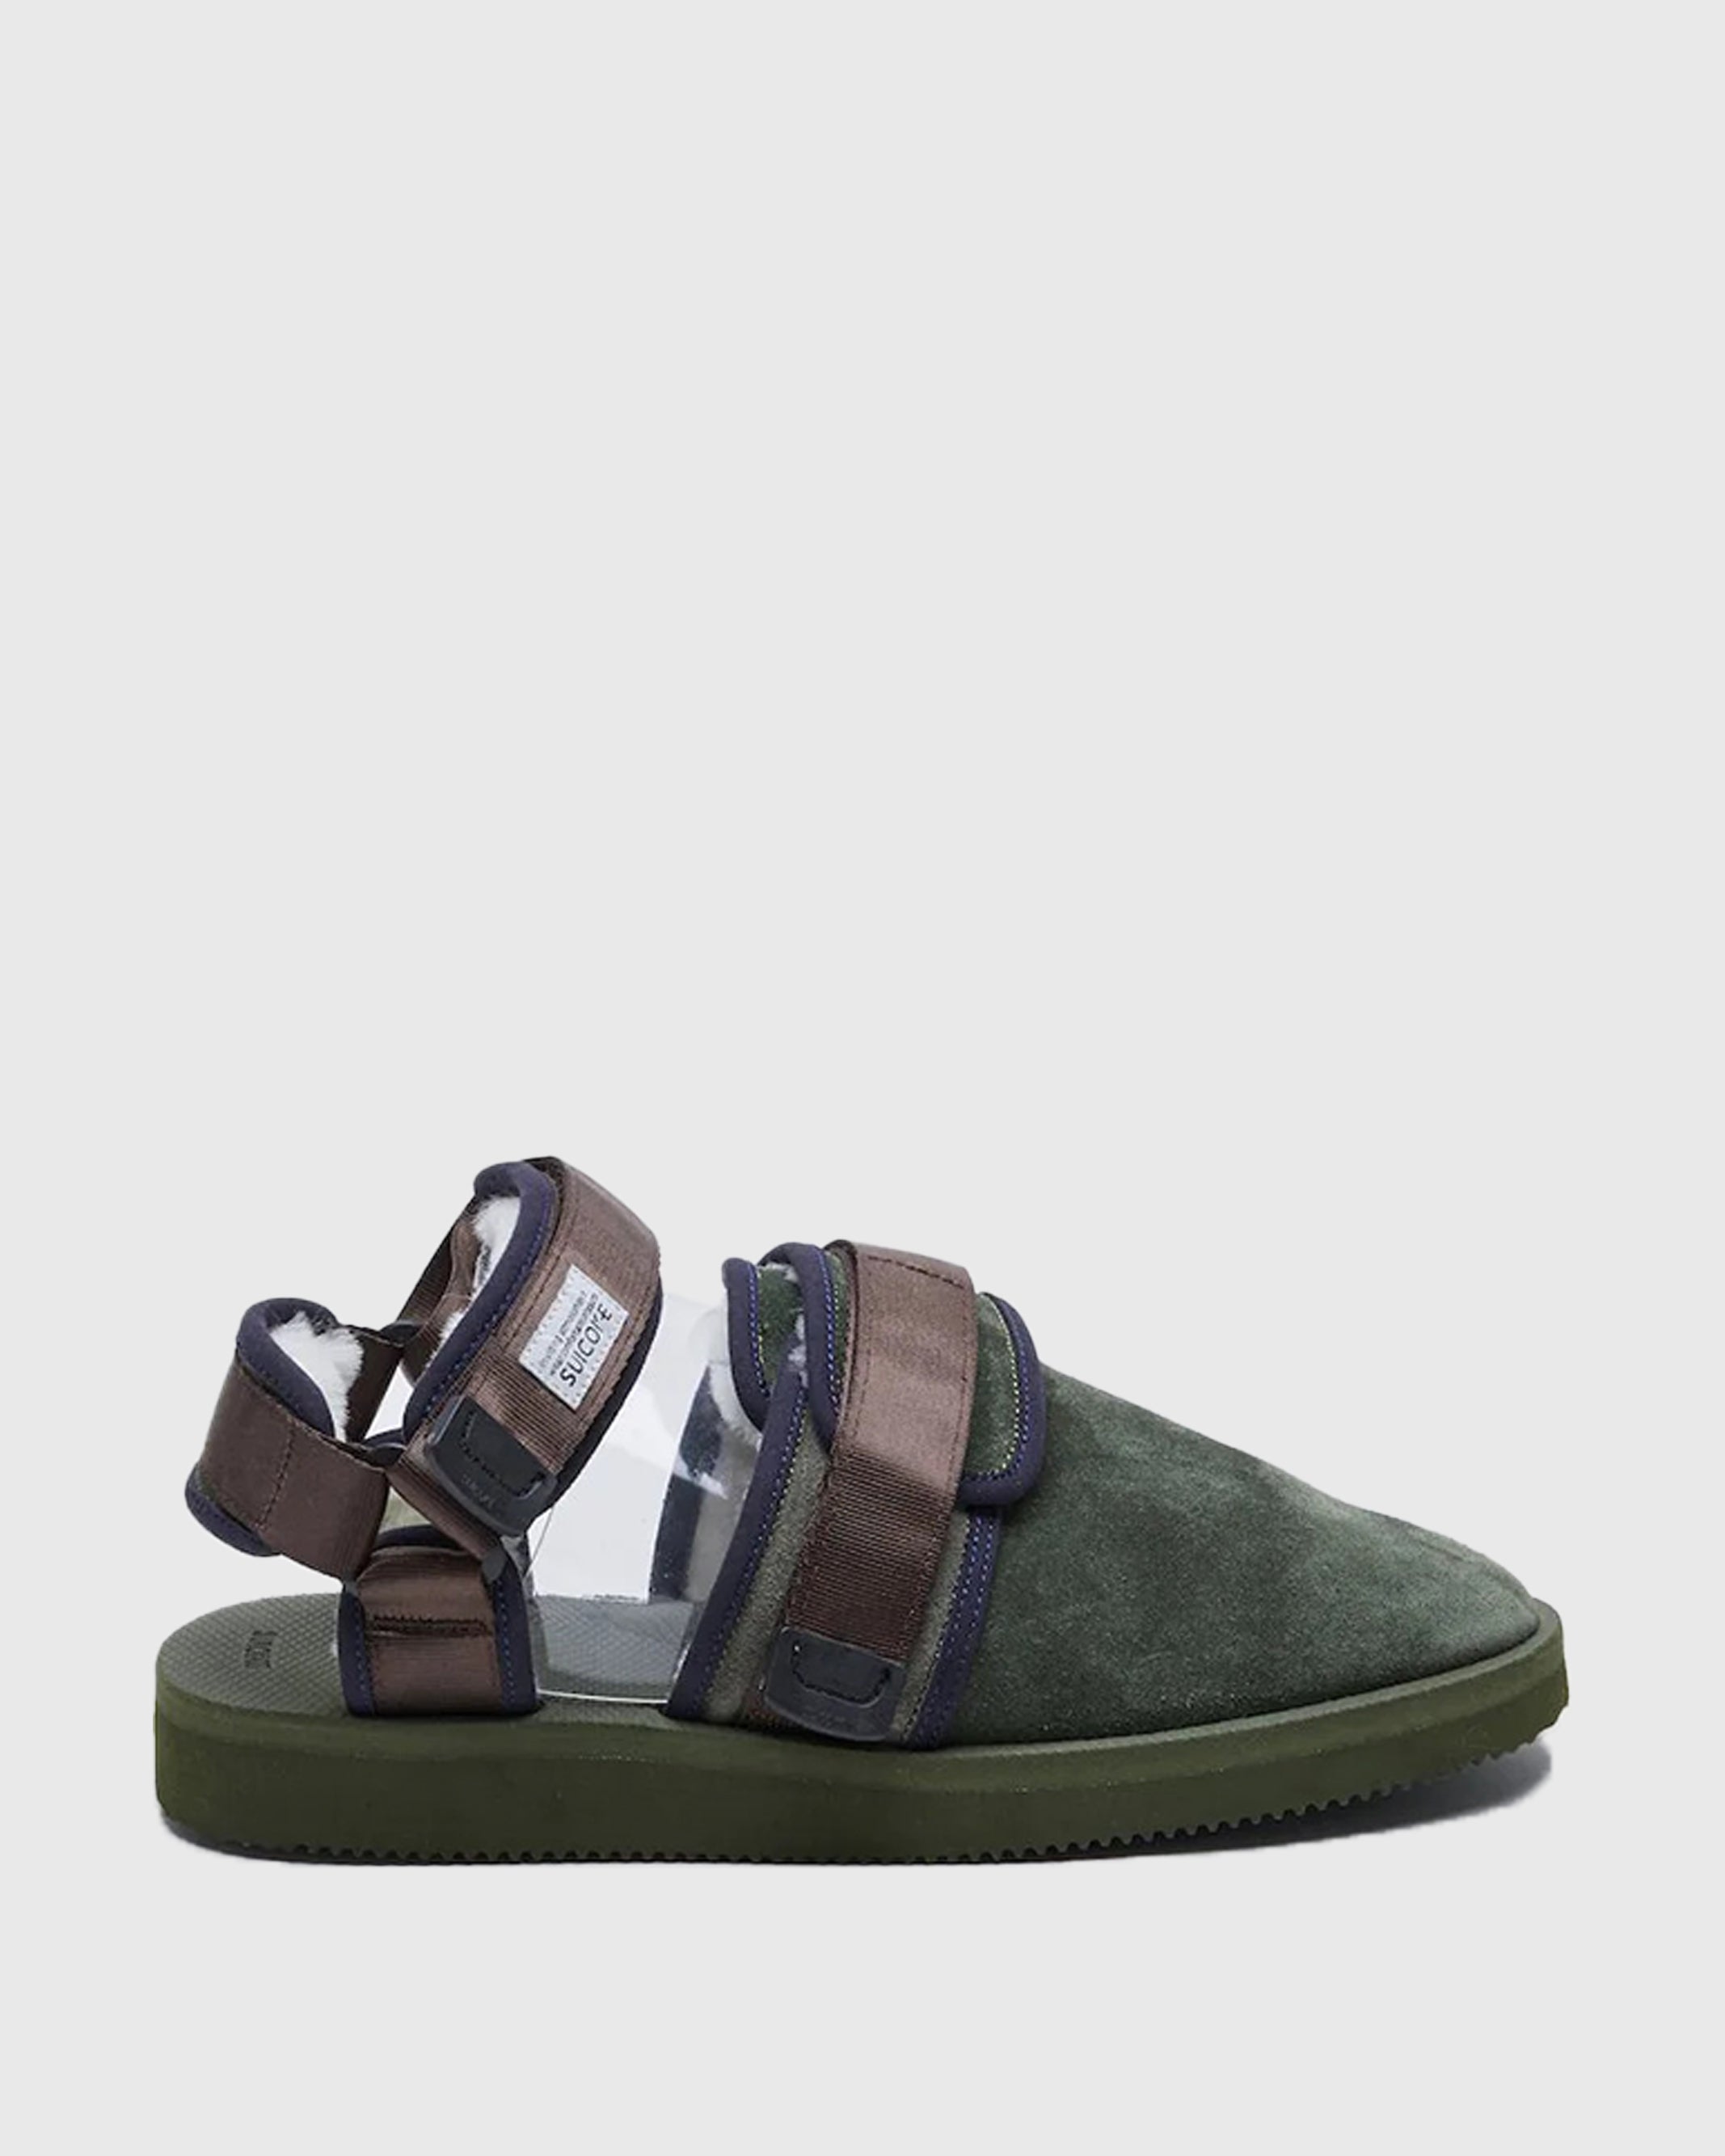 SUICOKE NOTS-Mab in Olive x Sage Green OG-061MAB | Shop from eightywingold an official brand partner for SUICOKE Canada and US.